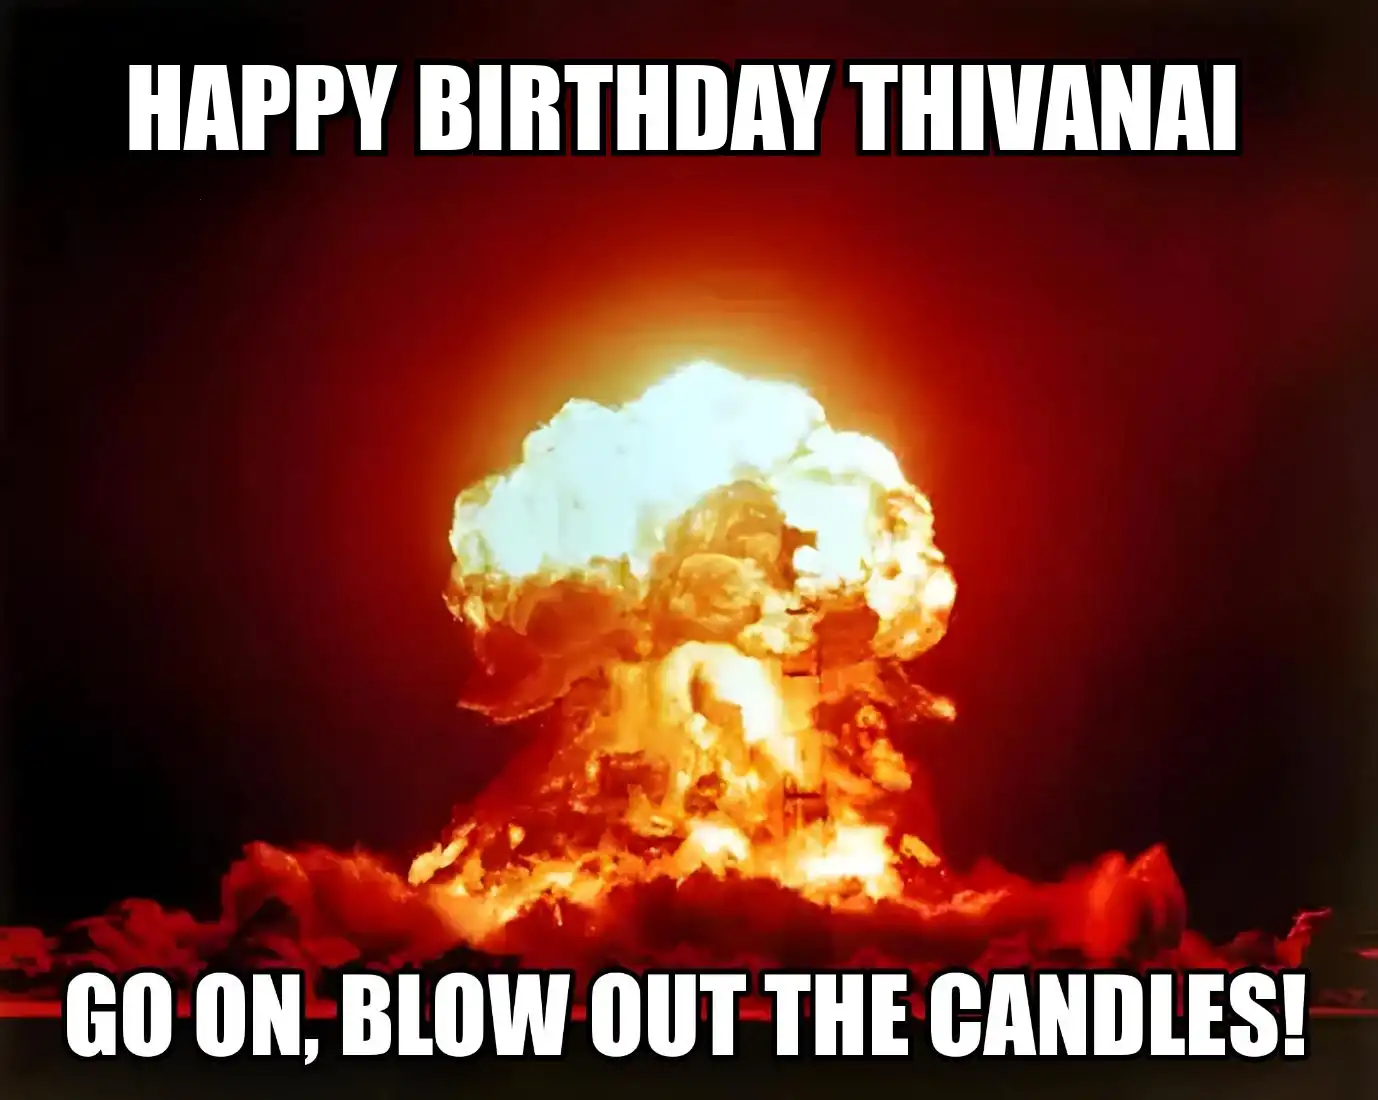 Happy Birthday Thivanai Go On Blow Out The Candles Meme